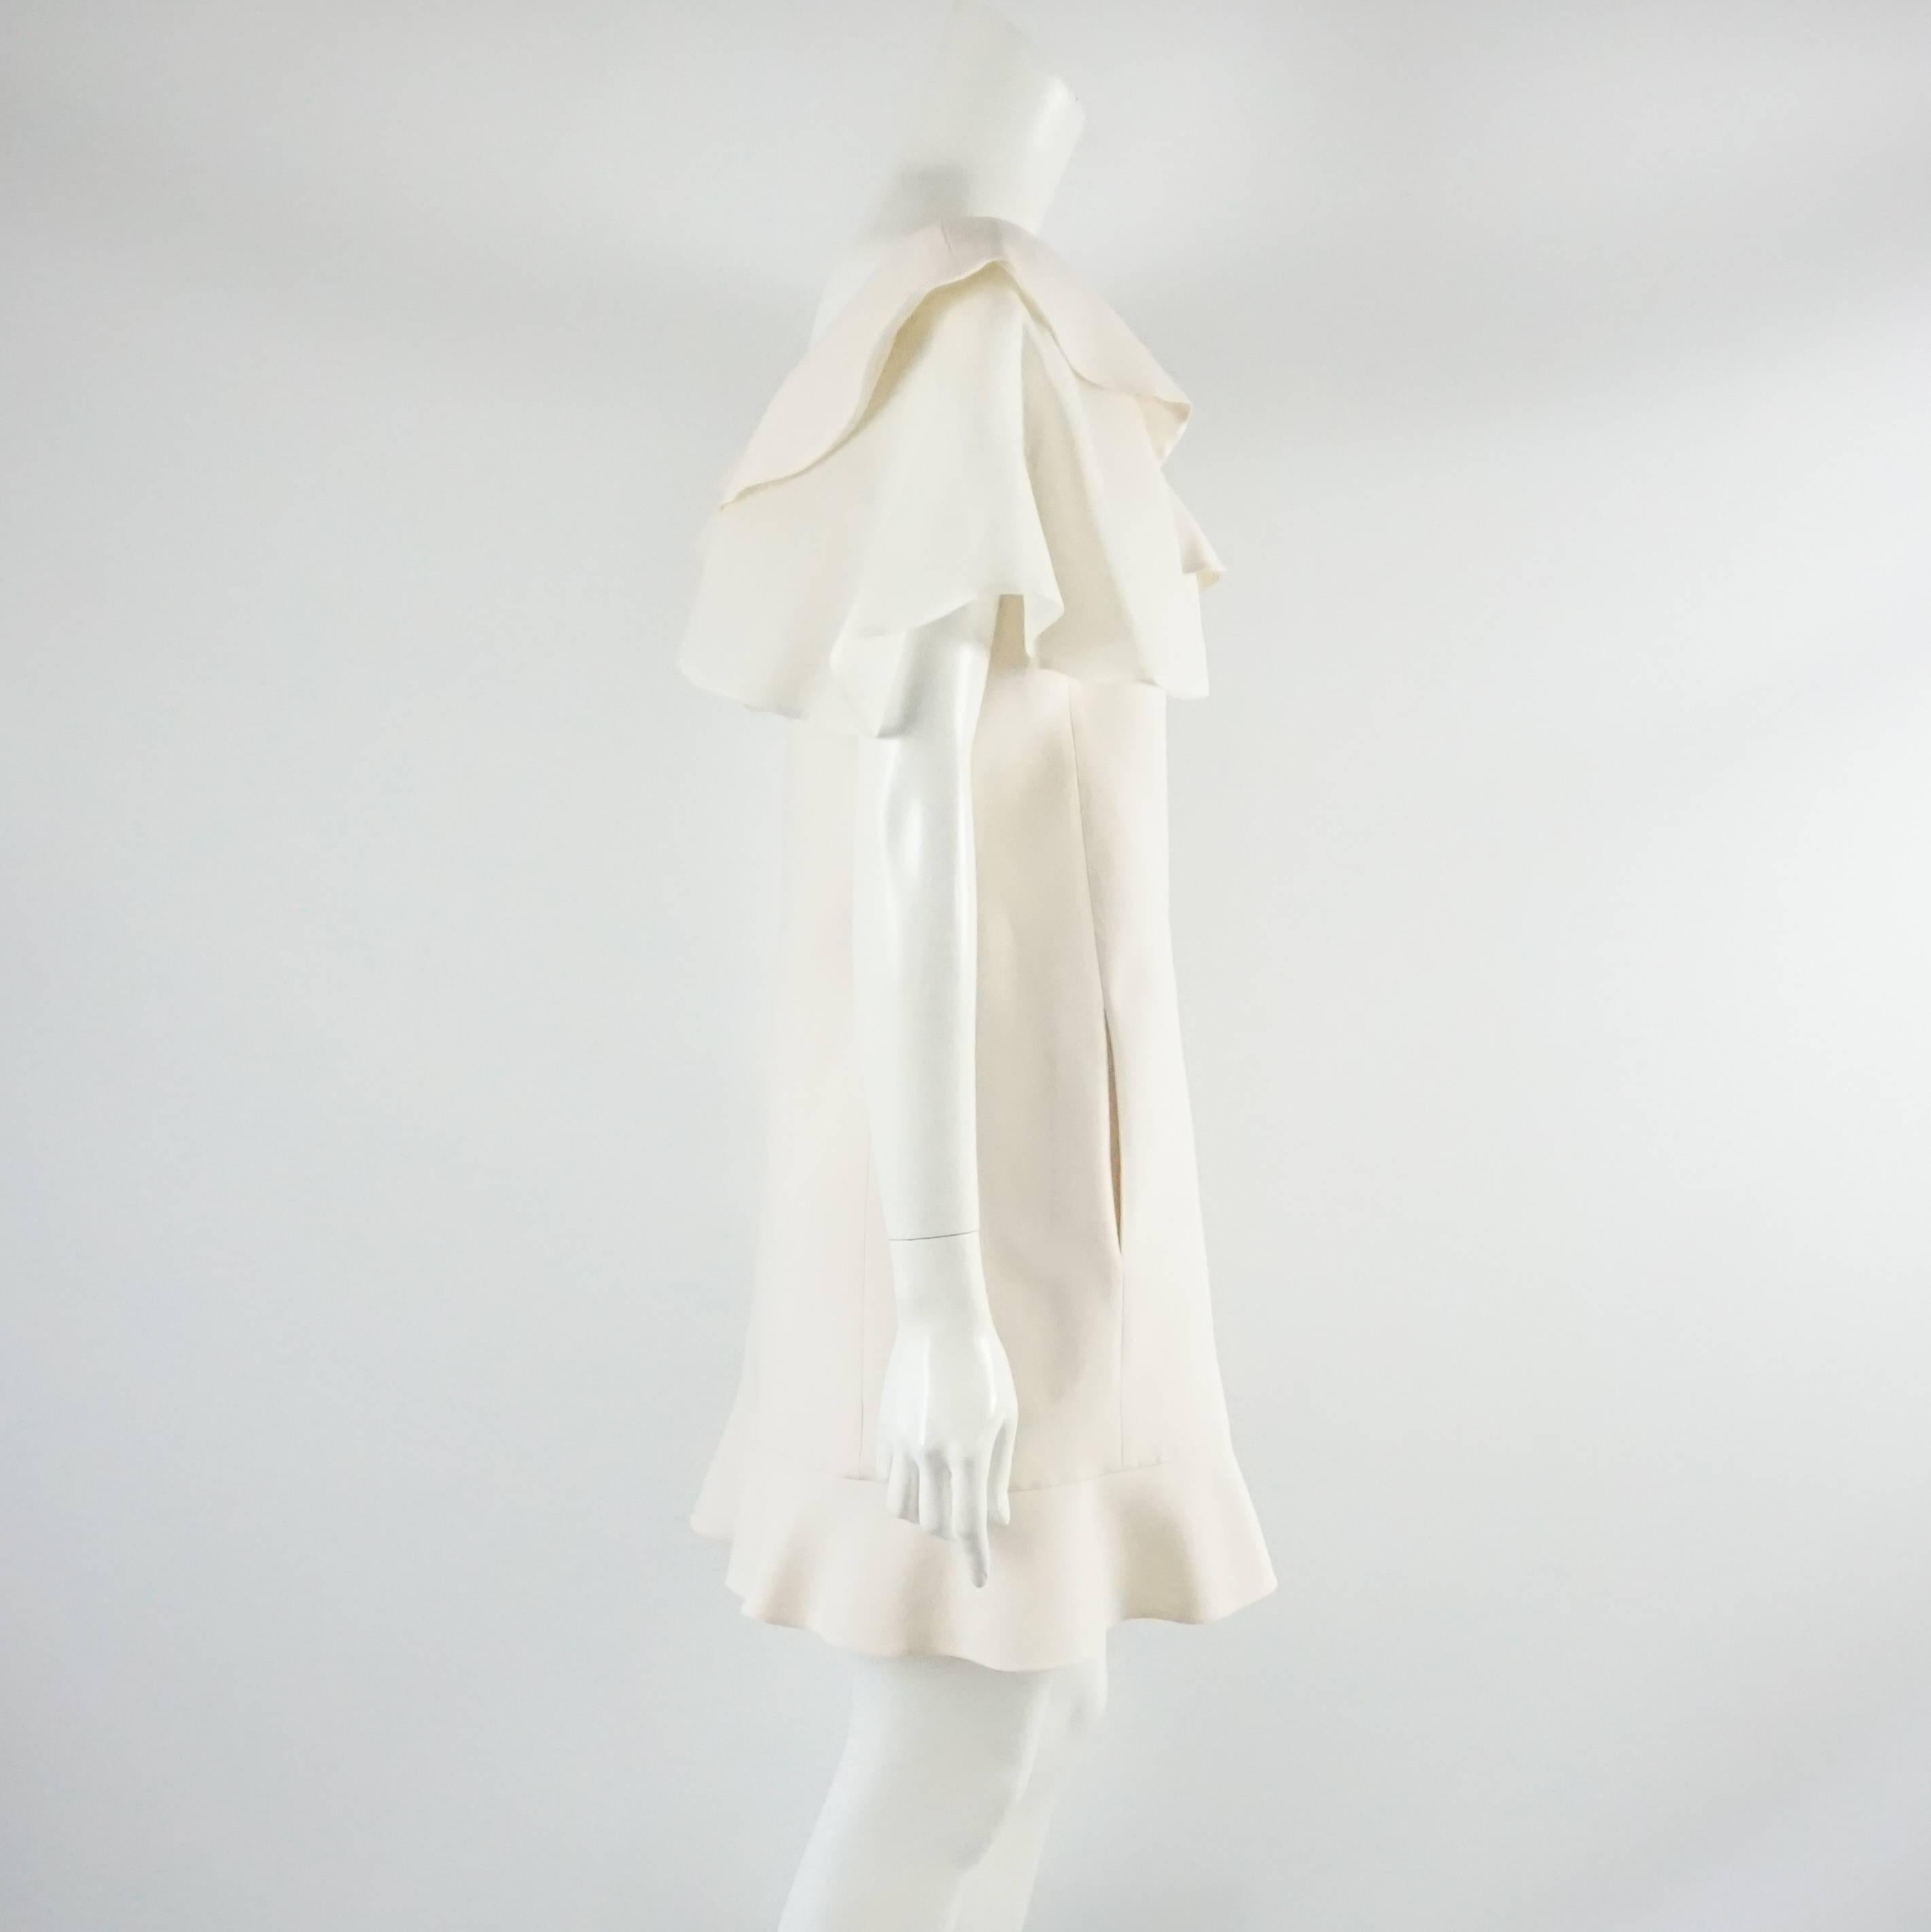 This Valentino ivory dress has ruffles along the neckline and bottom. It is a wool-silk blend with a back zipper. The dress is in excellent condition with minimal fabric wear. Size 6. 

Measurements
Bust: 36"
Waist: 33"
Hips: